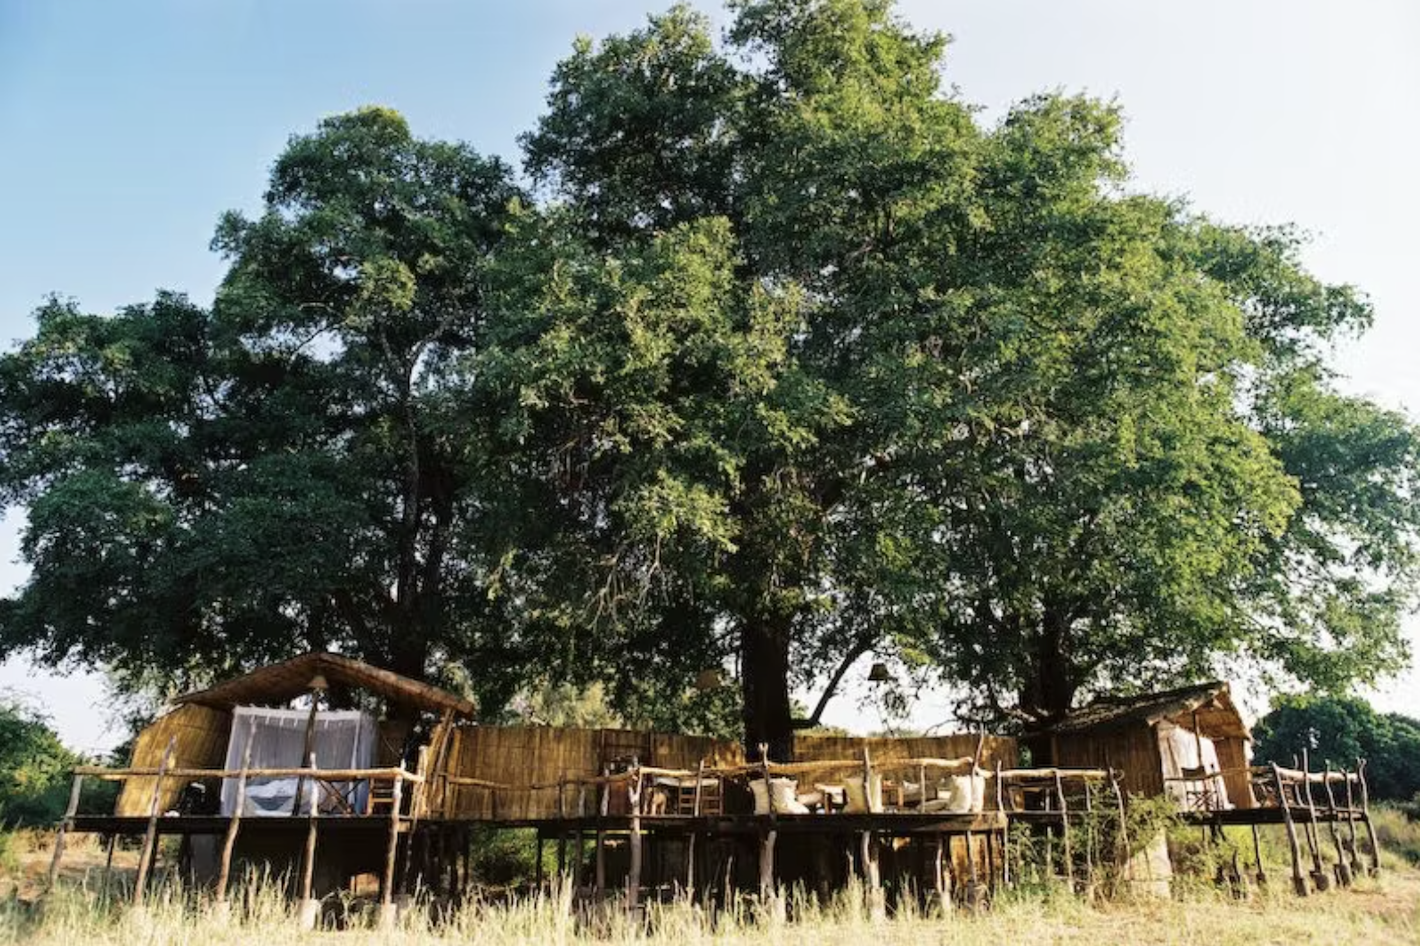 South Luangwa is one of south-central Africa's most iconic wilderness areas. Flatdogs is on its border, and there's no fence to impede the wildlife, so animals constantly visit the camp.